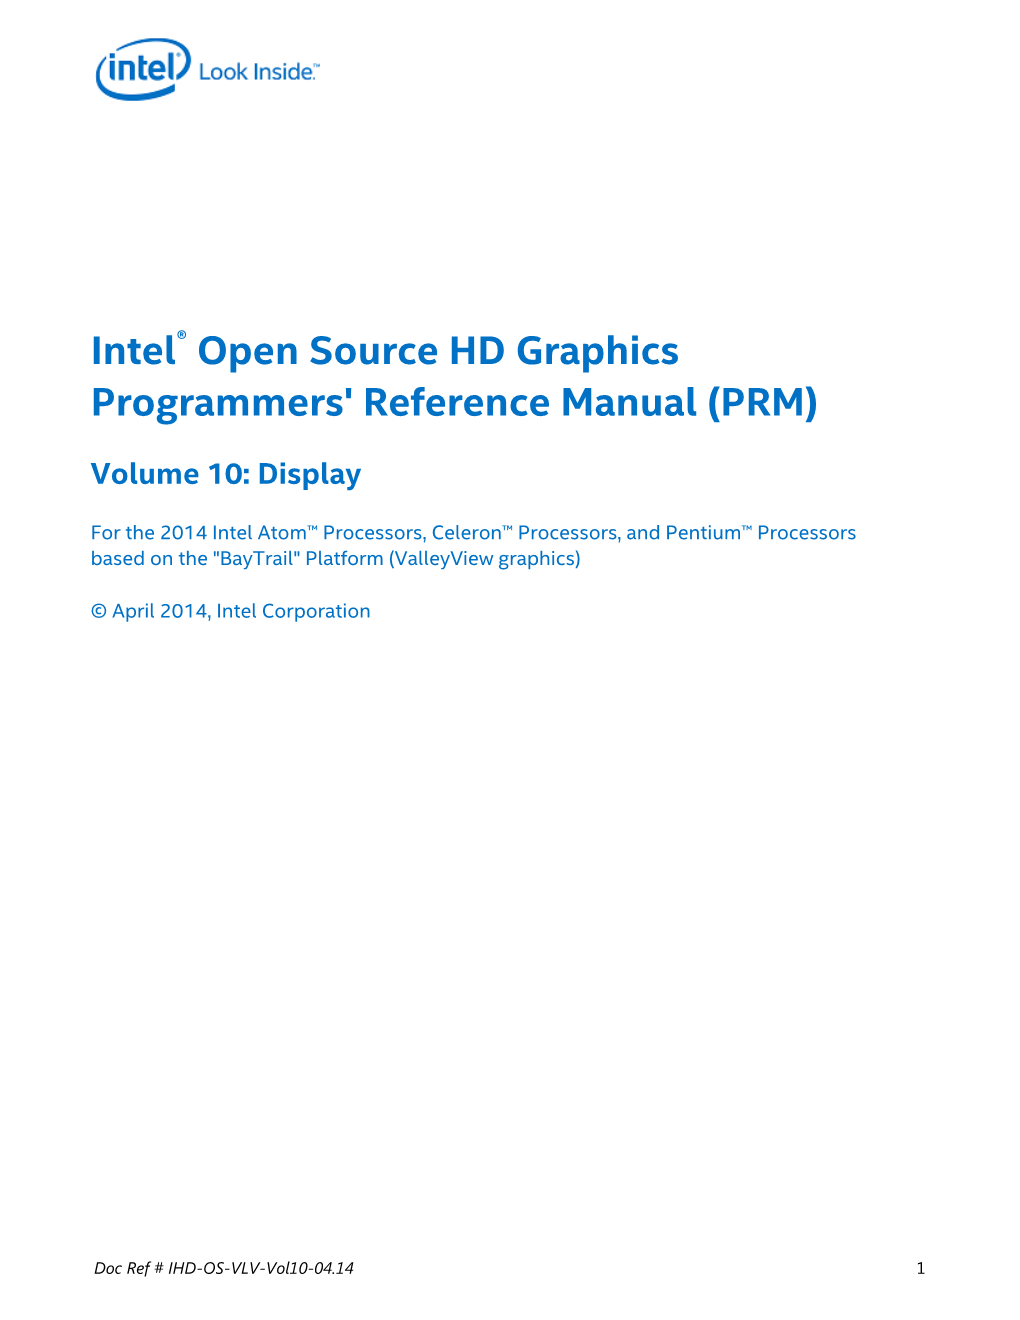 Intel® Open Source HD Graphics Programmers' Reference Manual (PRM)